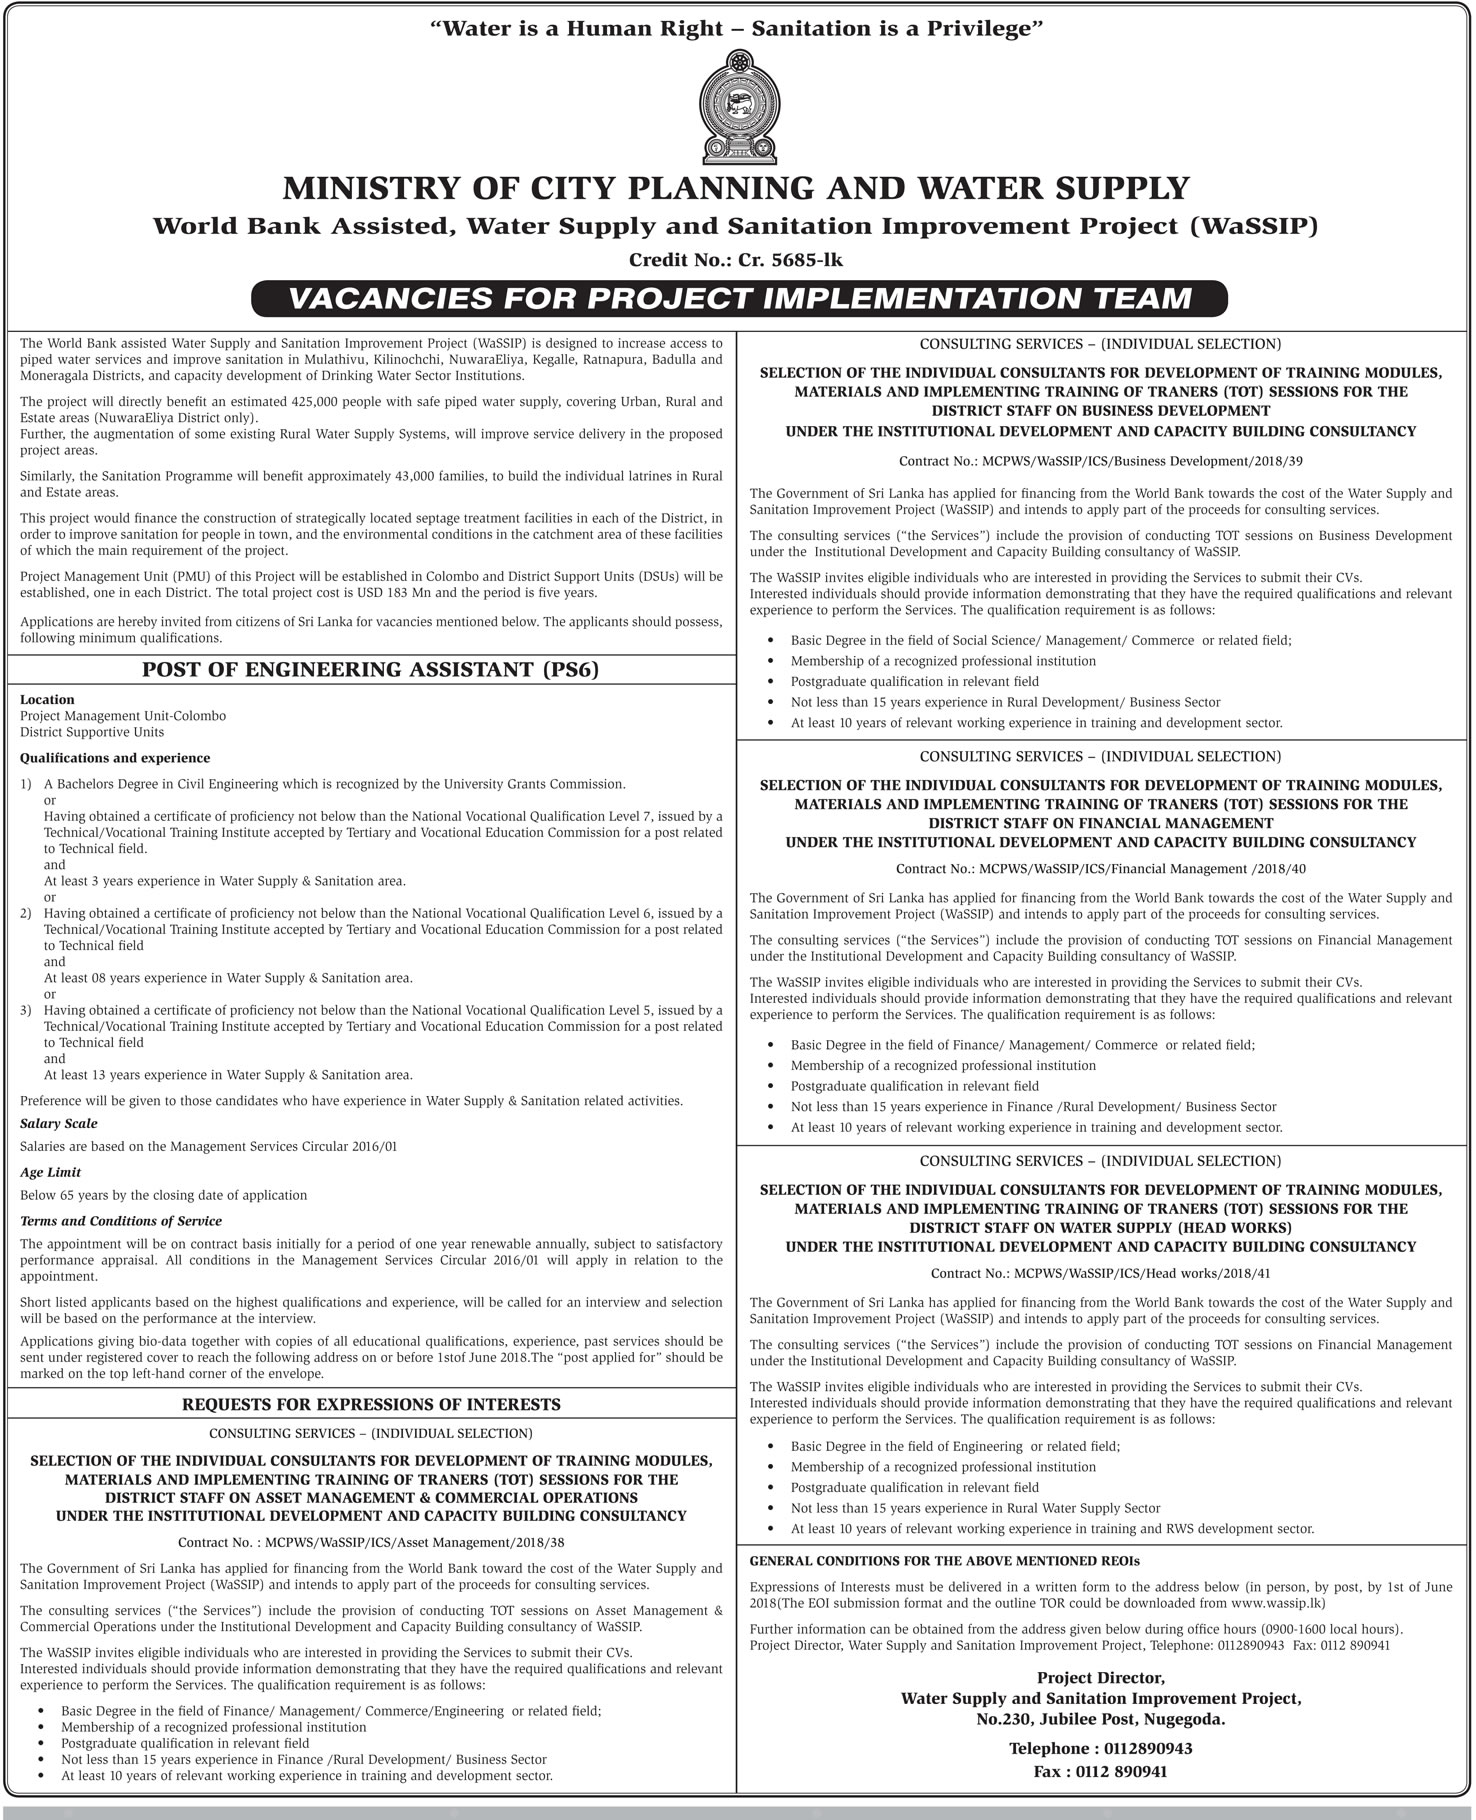 Ministry of City Planning & Water Supply Engineering Assistant Jobs Vacancies Application